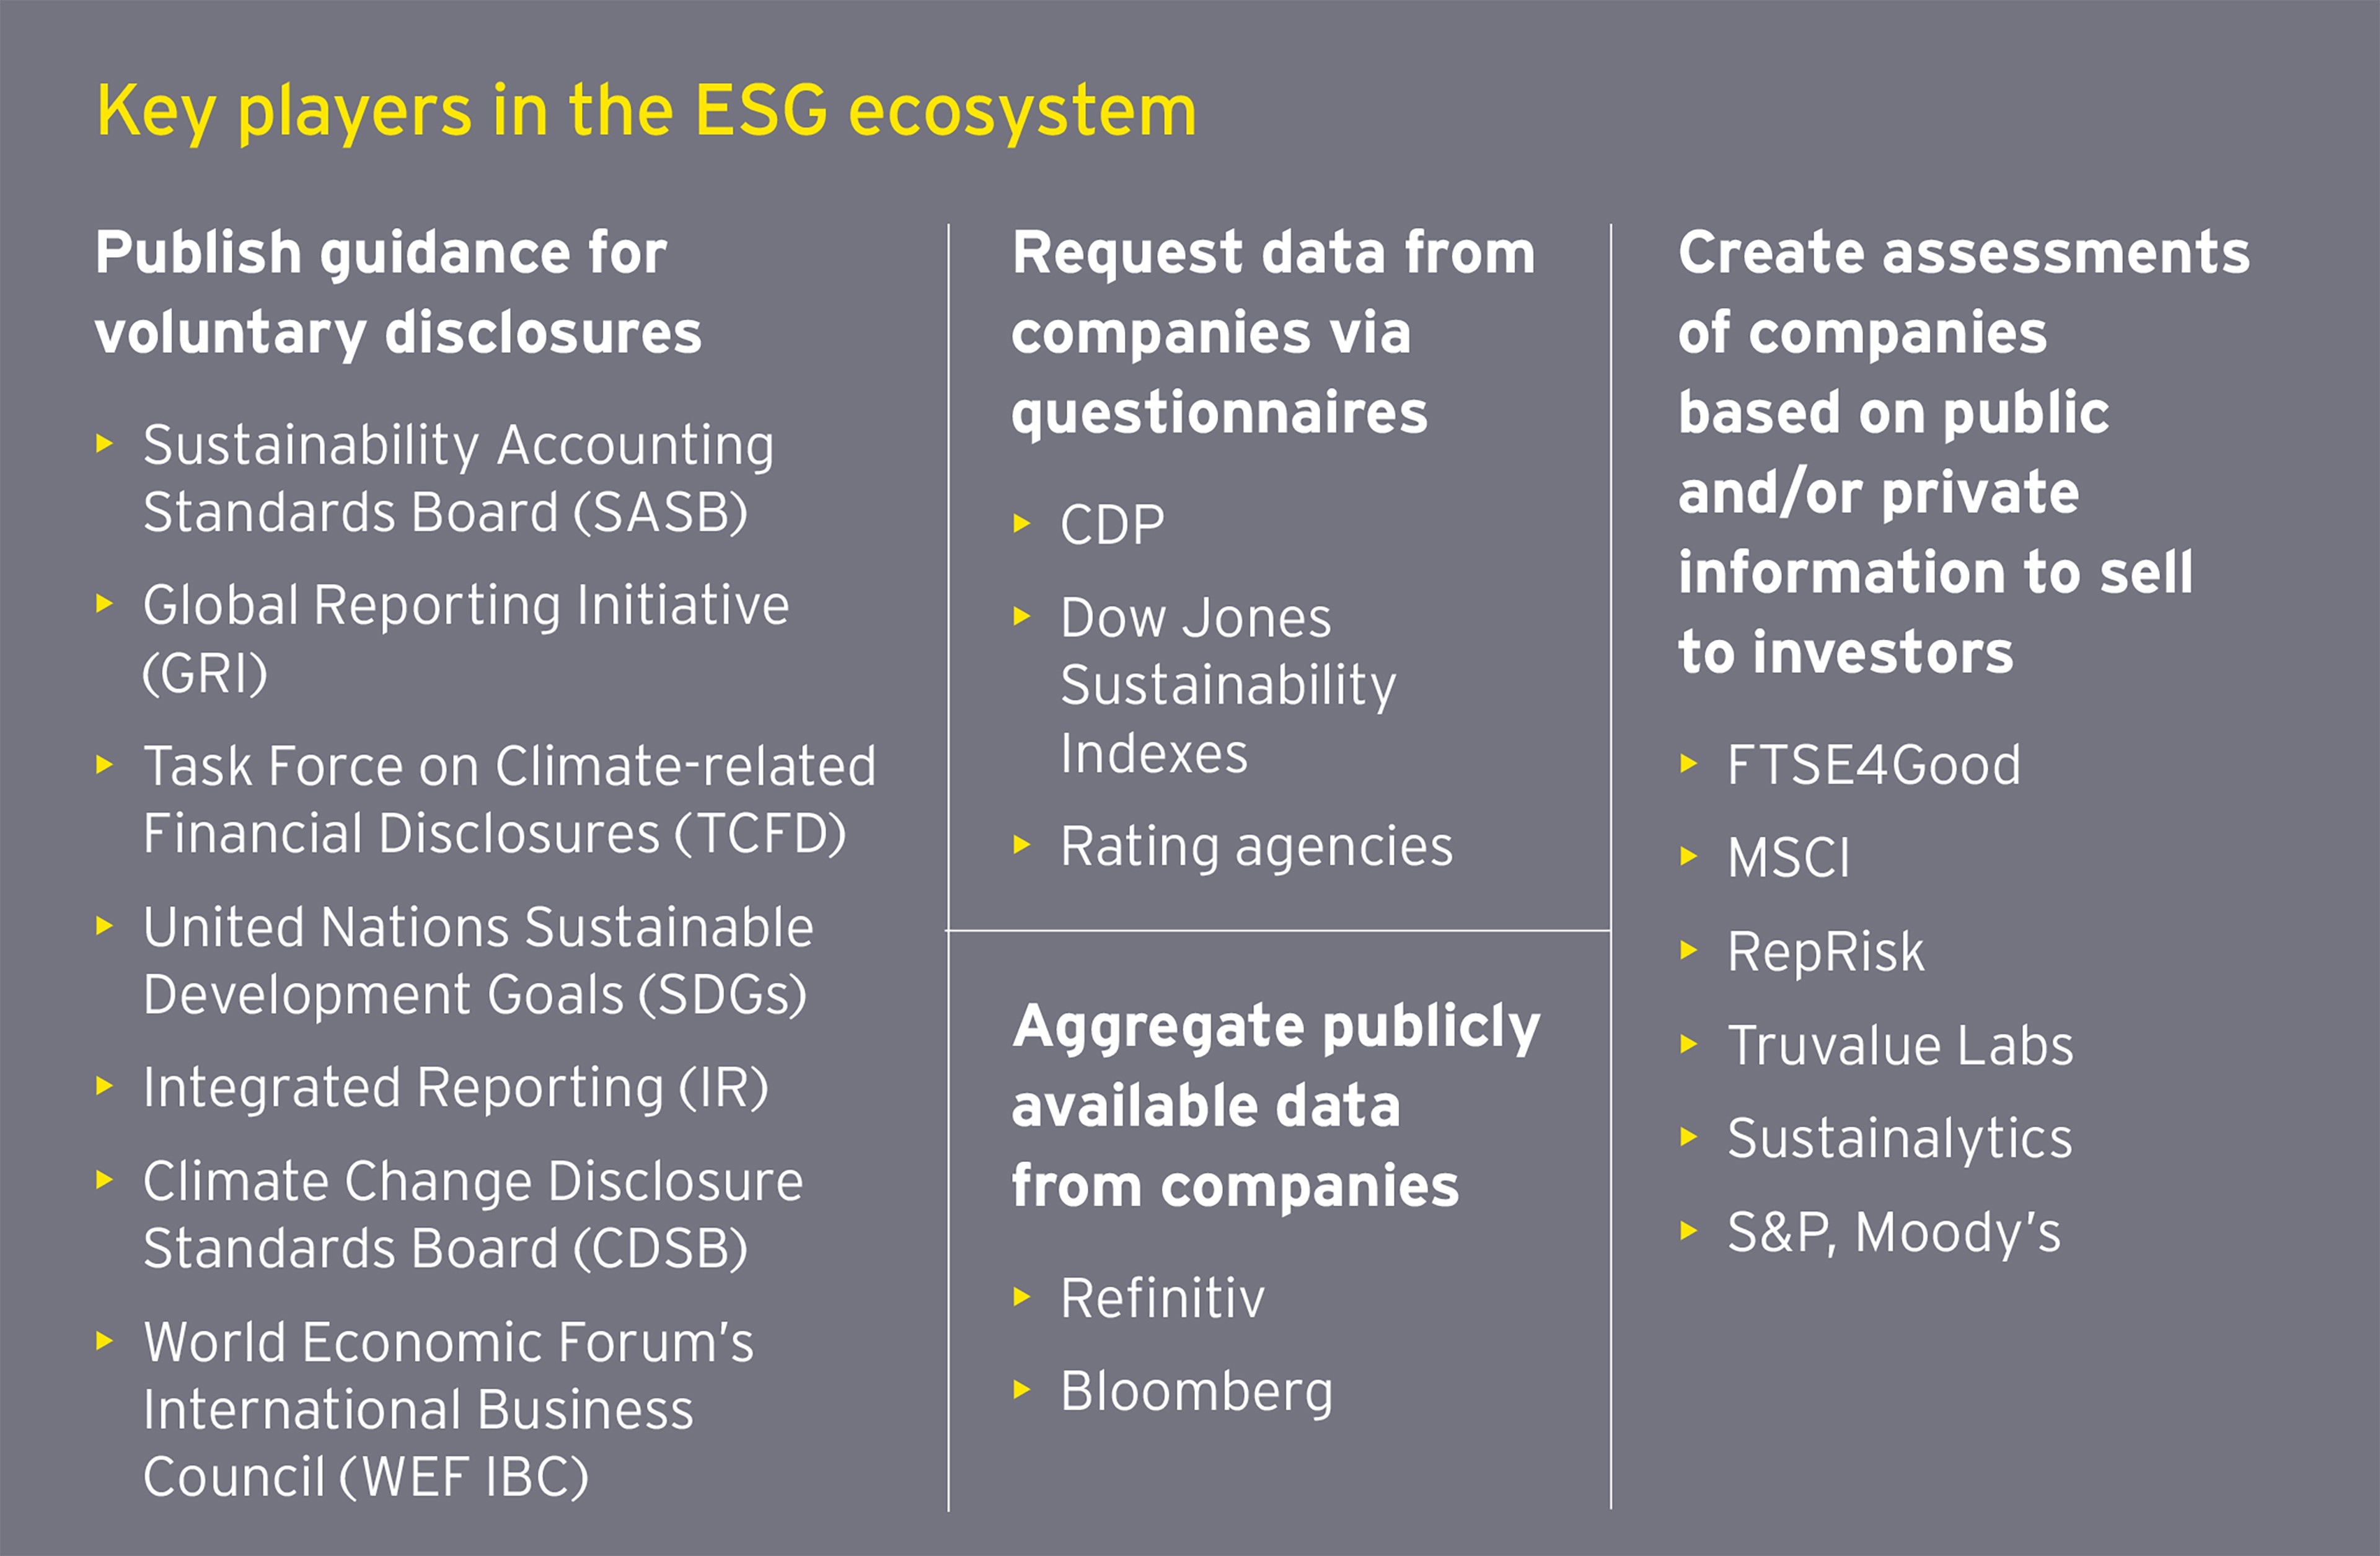 EY - Key players in the esg ecosystem